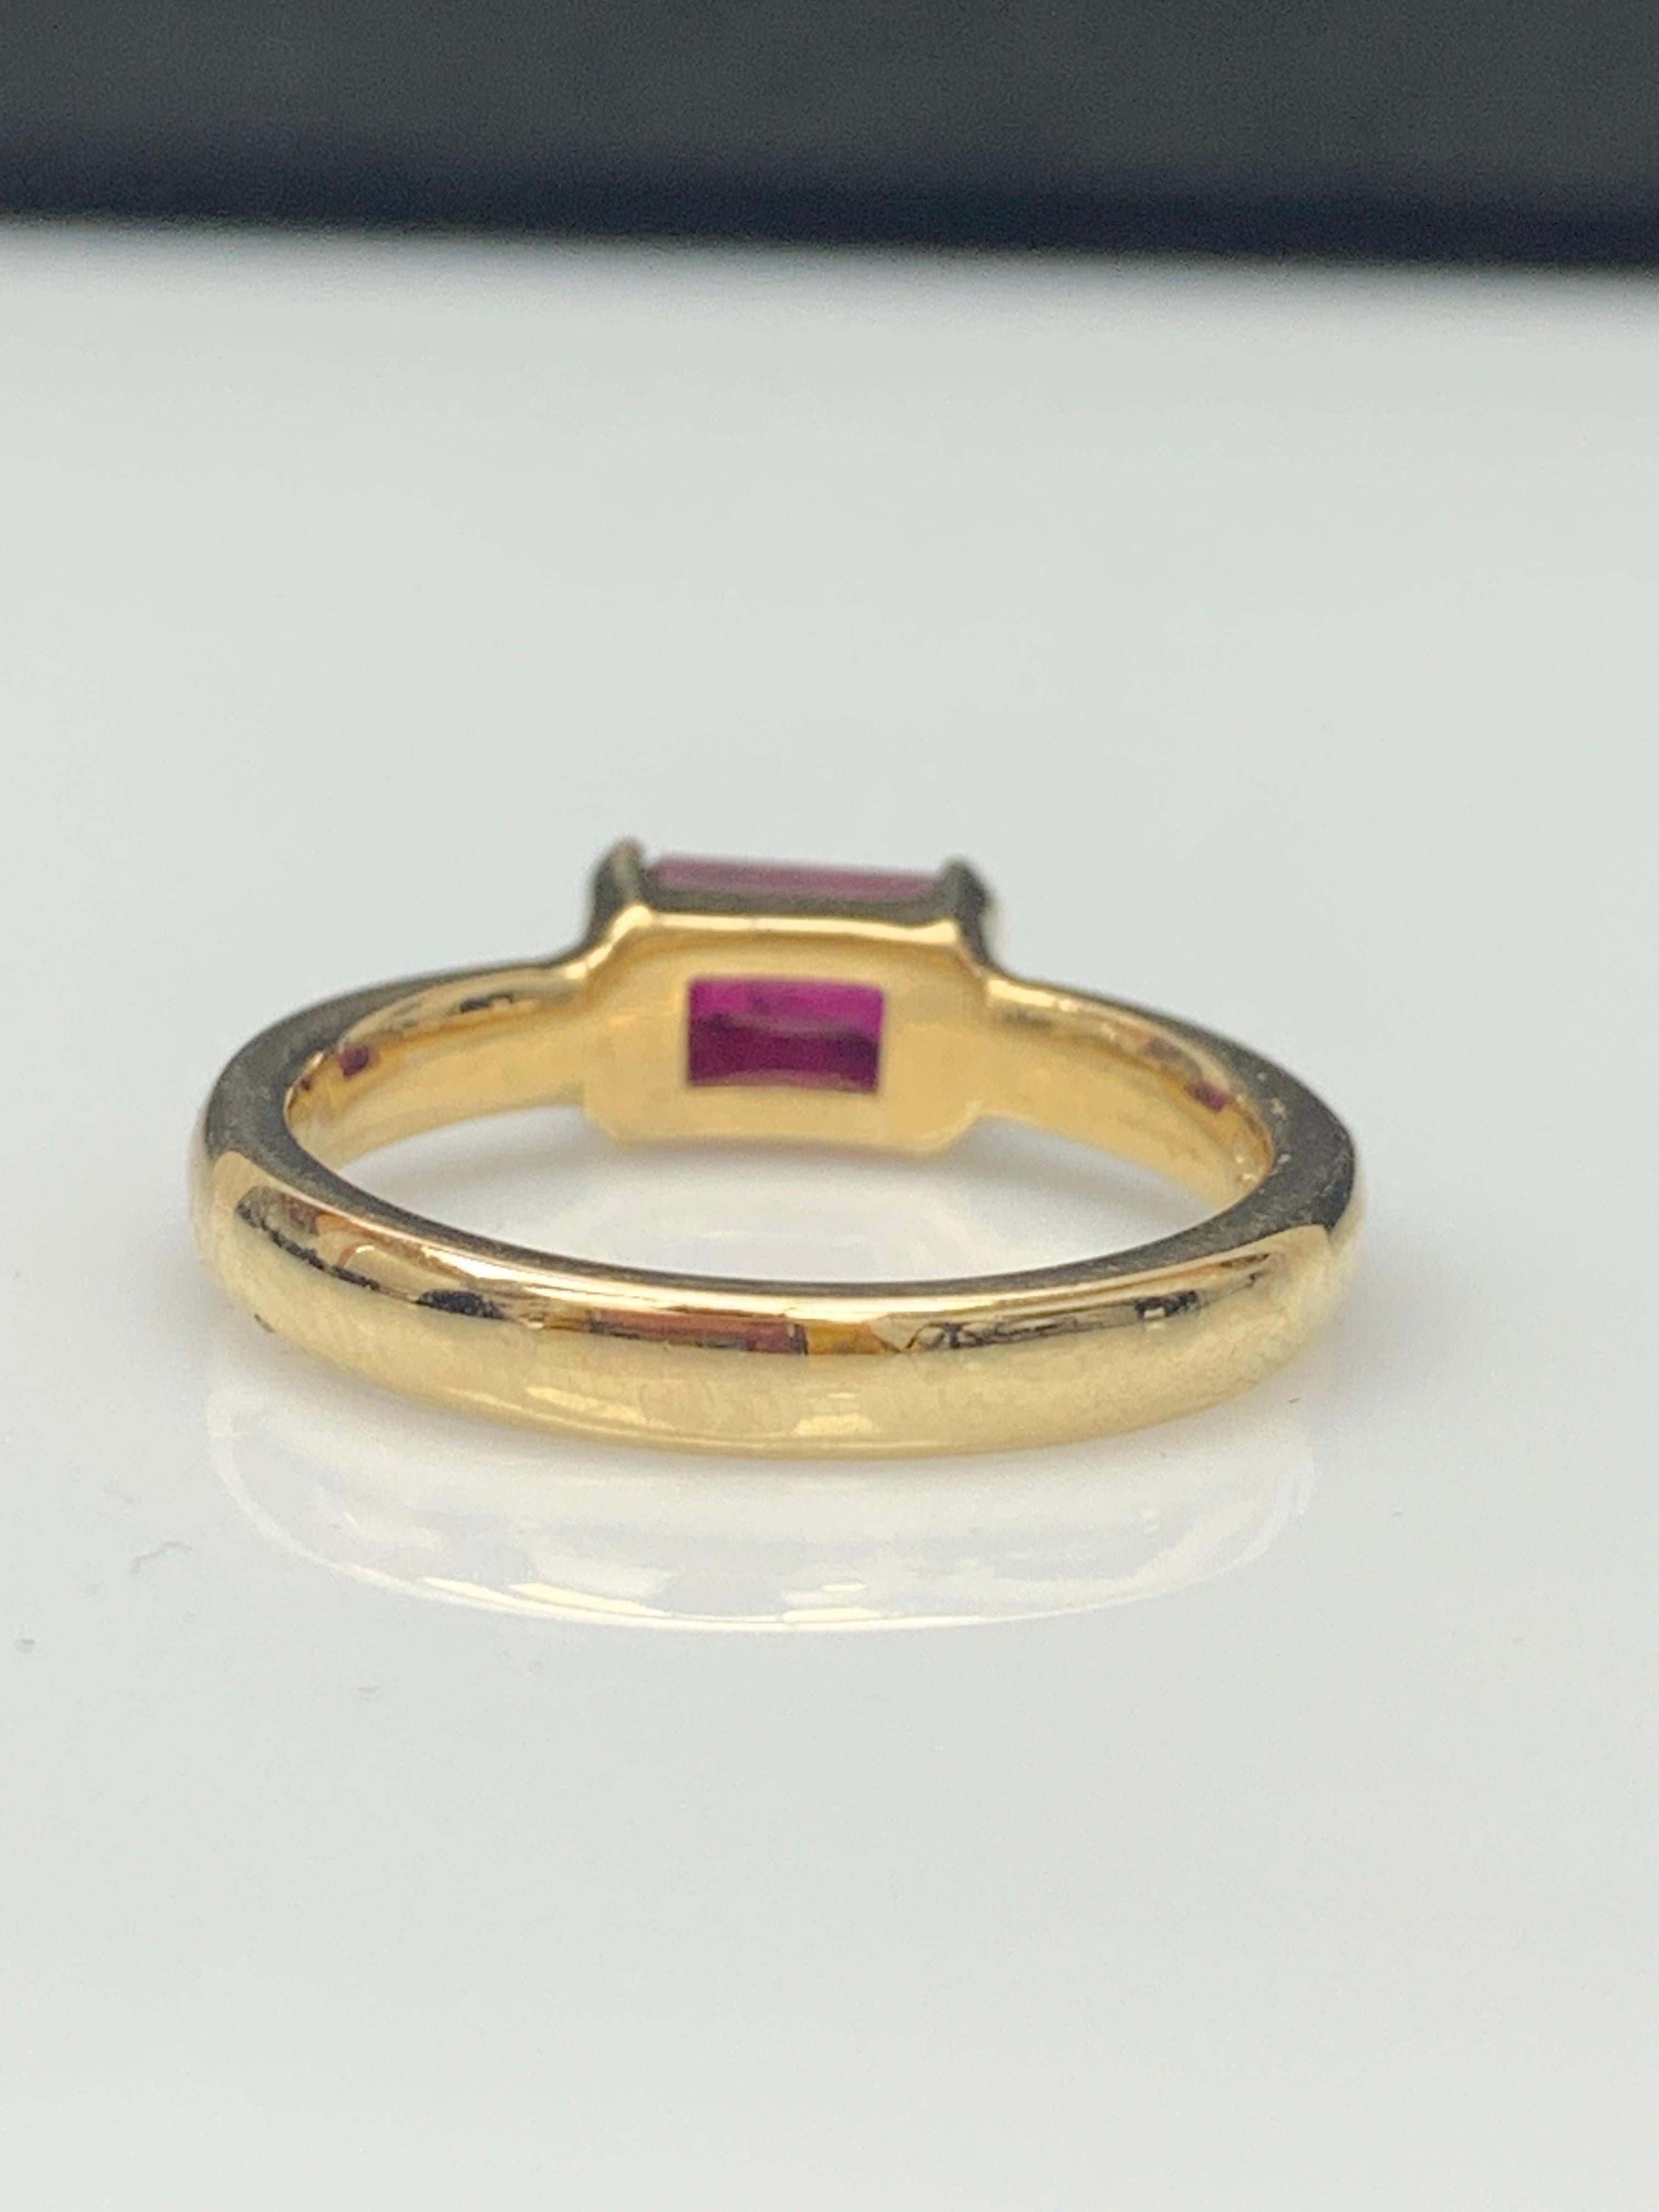 1.06 Carat Emerald Cut Ruby Band Ring in 14K Yellow Gold For Sale 6